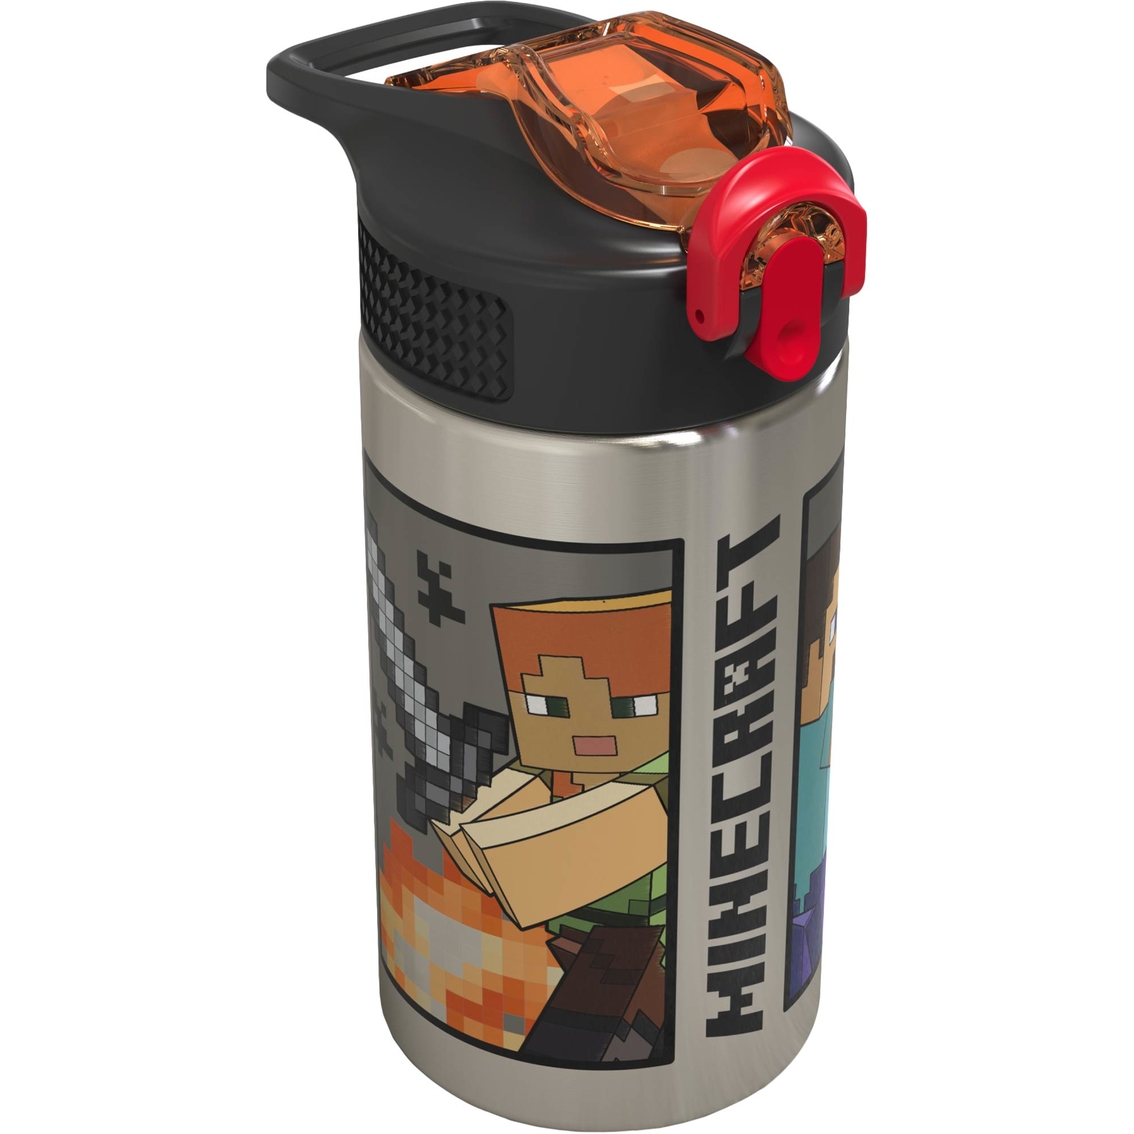 Minecraft Water Bottle With Straw - Creeper